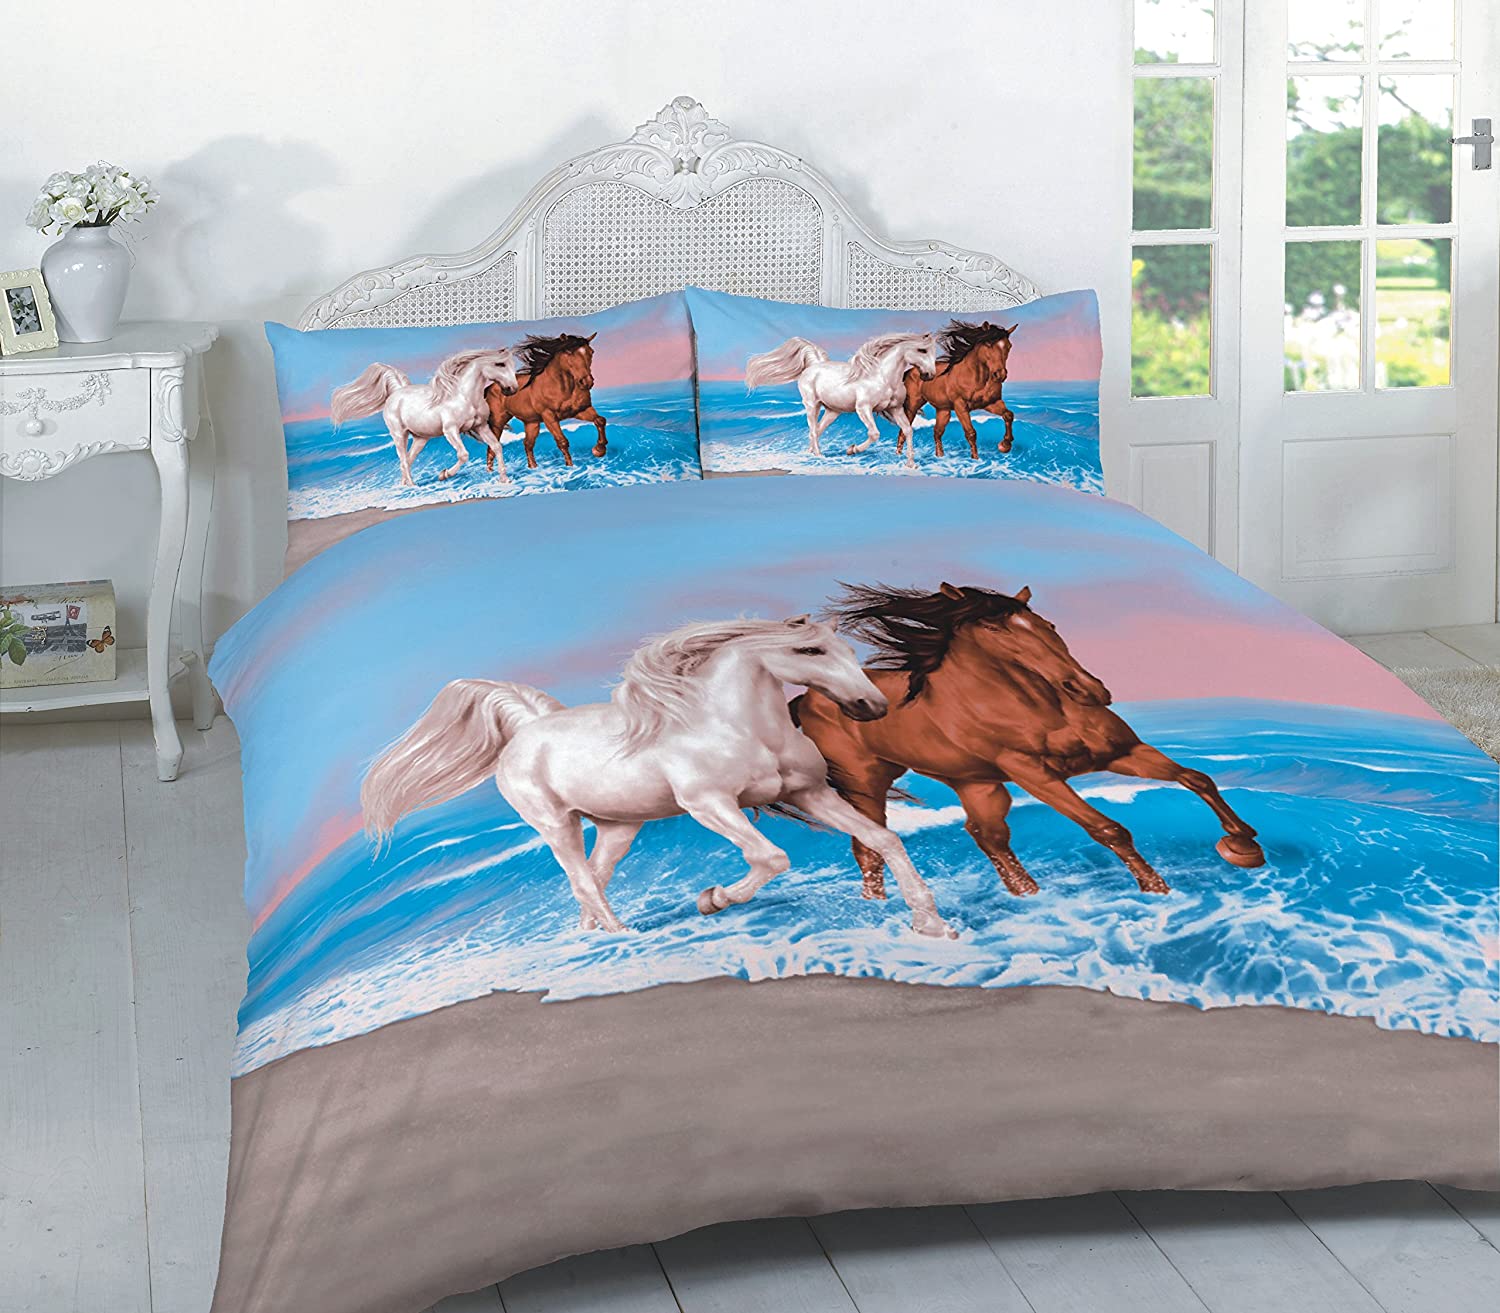 Multi Horse Printed 3d bedding Duvet Cover sets - Available All UK Sizes & with Pillowcases